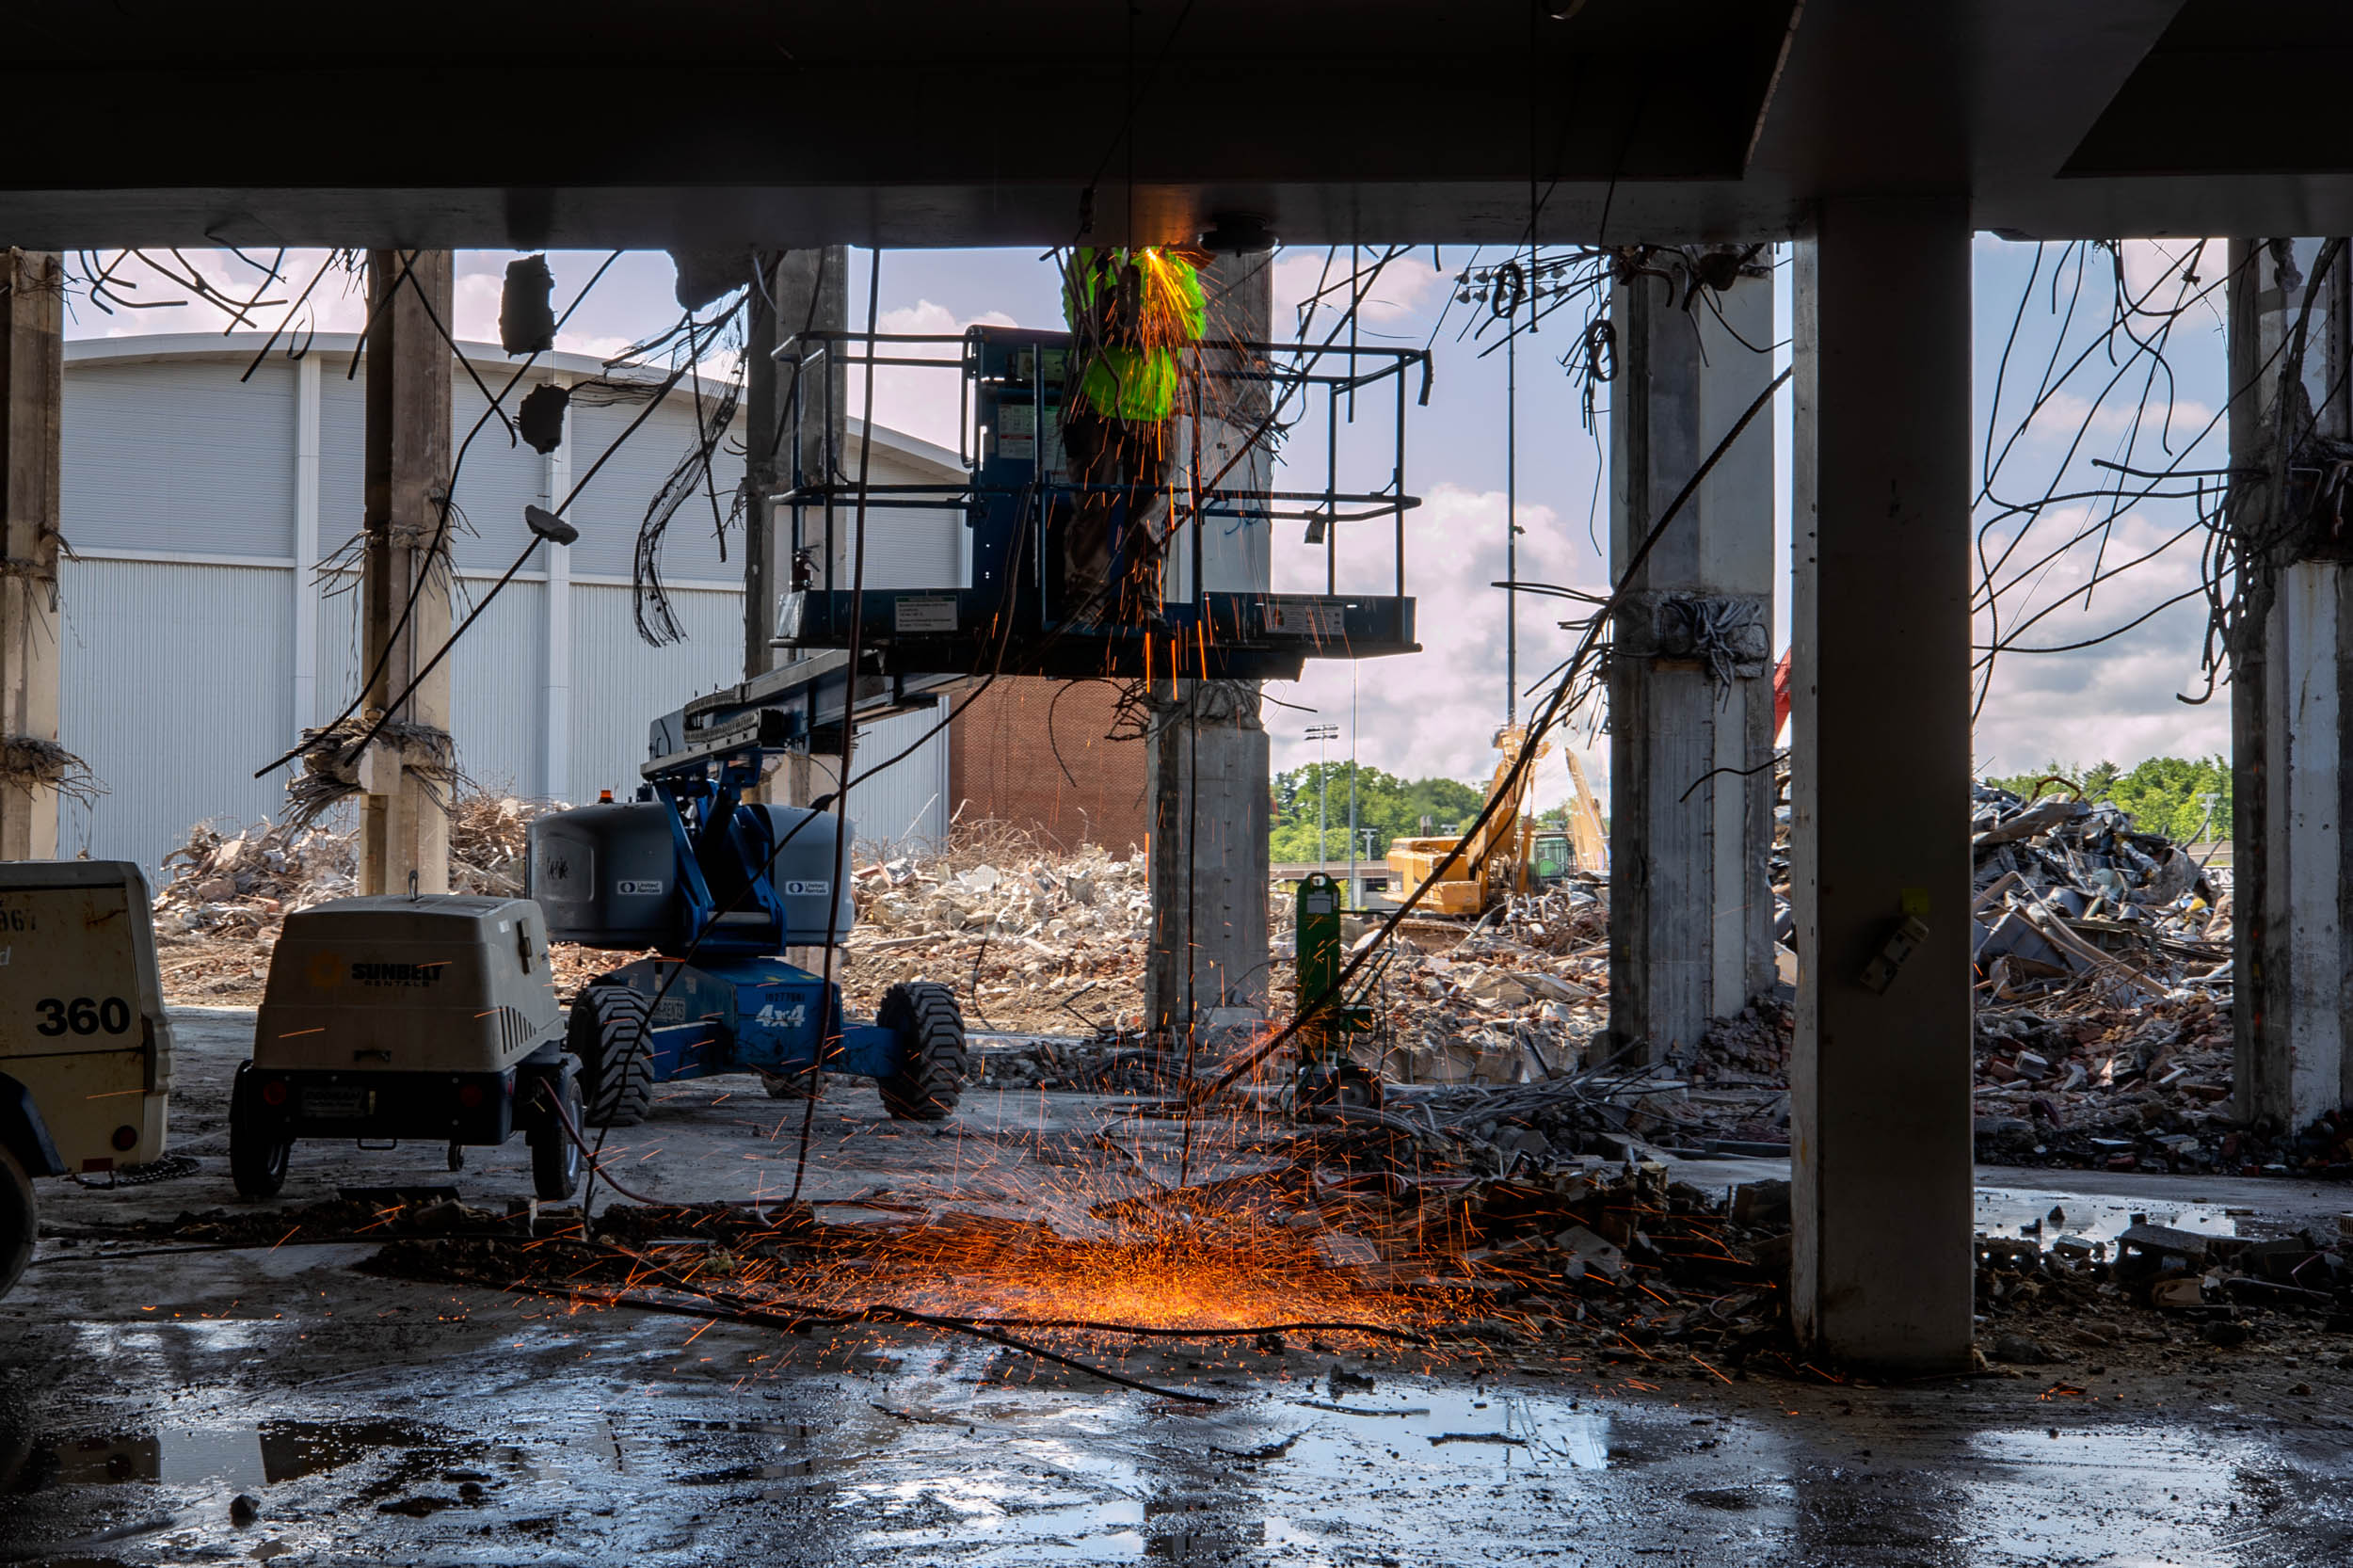 Sparks falling from a construction worker working